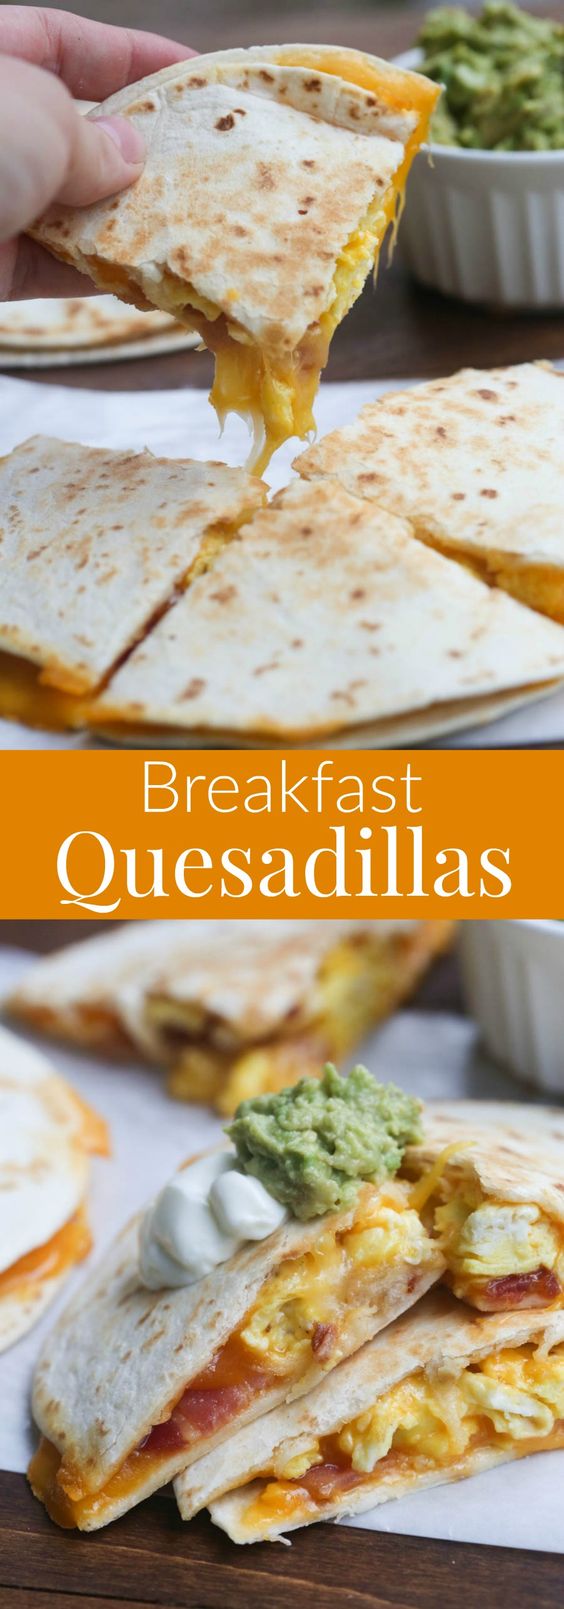 Breakfast Quesadillas - These Breakfast Quesadillas with bacon, egg and cheese are an easy breakfast or dinner idea your family is sure to LOVE!